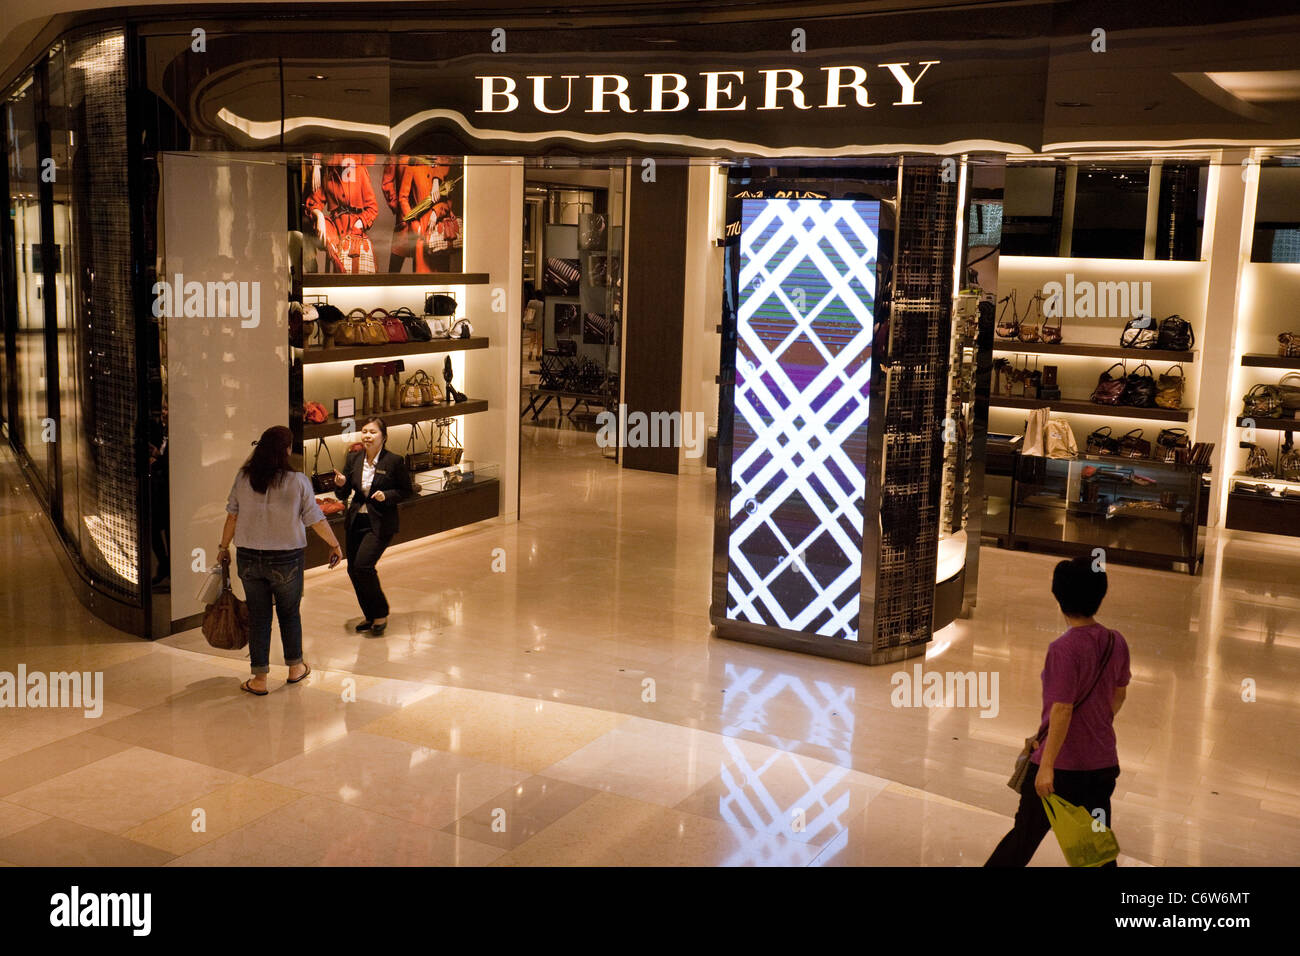 burberry outlet tulalip